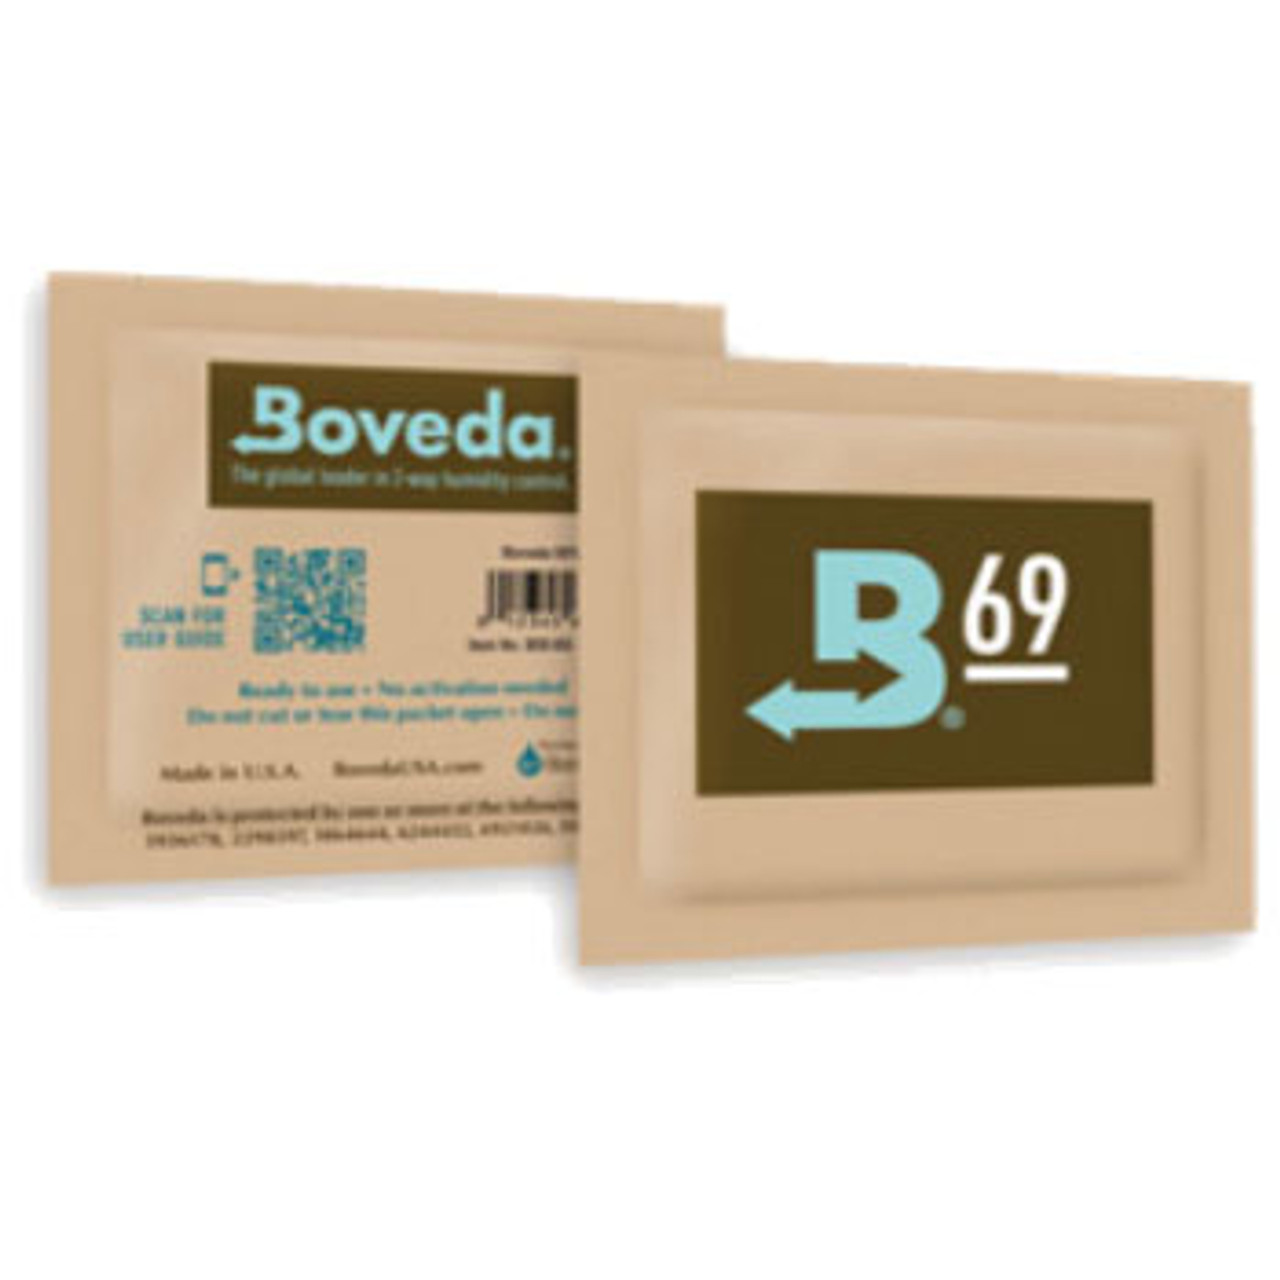 https://cdn11.bigcommerce.com/s-tzy07btveh/images/stencil/1280x1280/products/251/574/Boveda-69-Humidity-Pack-Cigar-Humidifiers-350x350__11547.1606154072.jpg?c=1